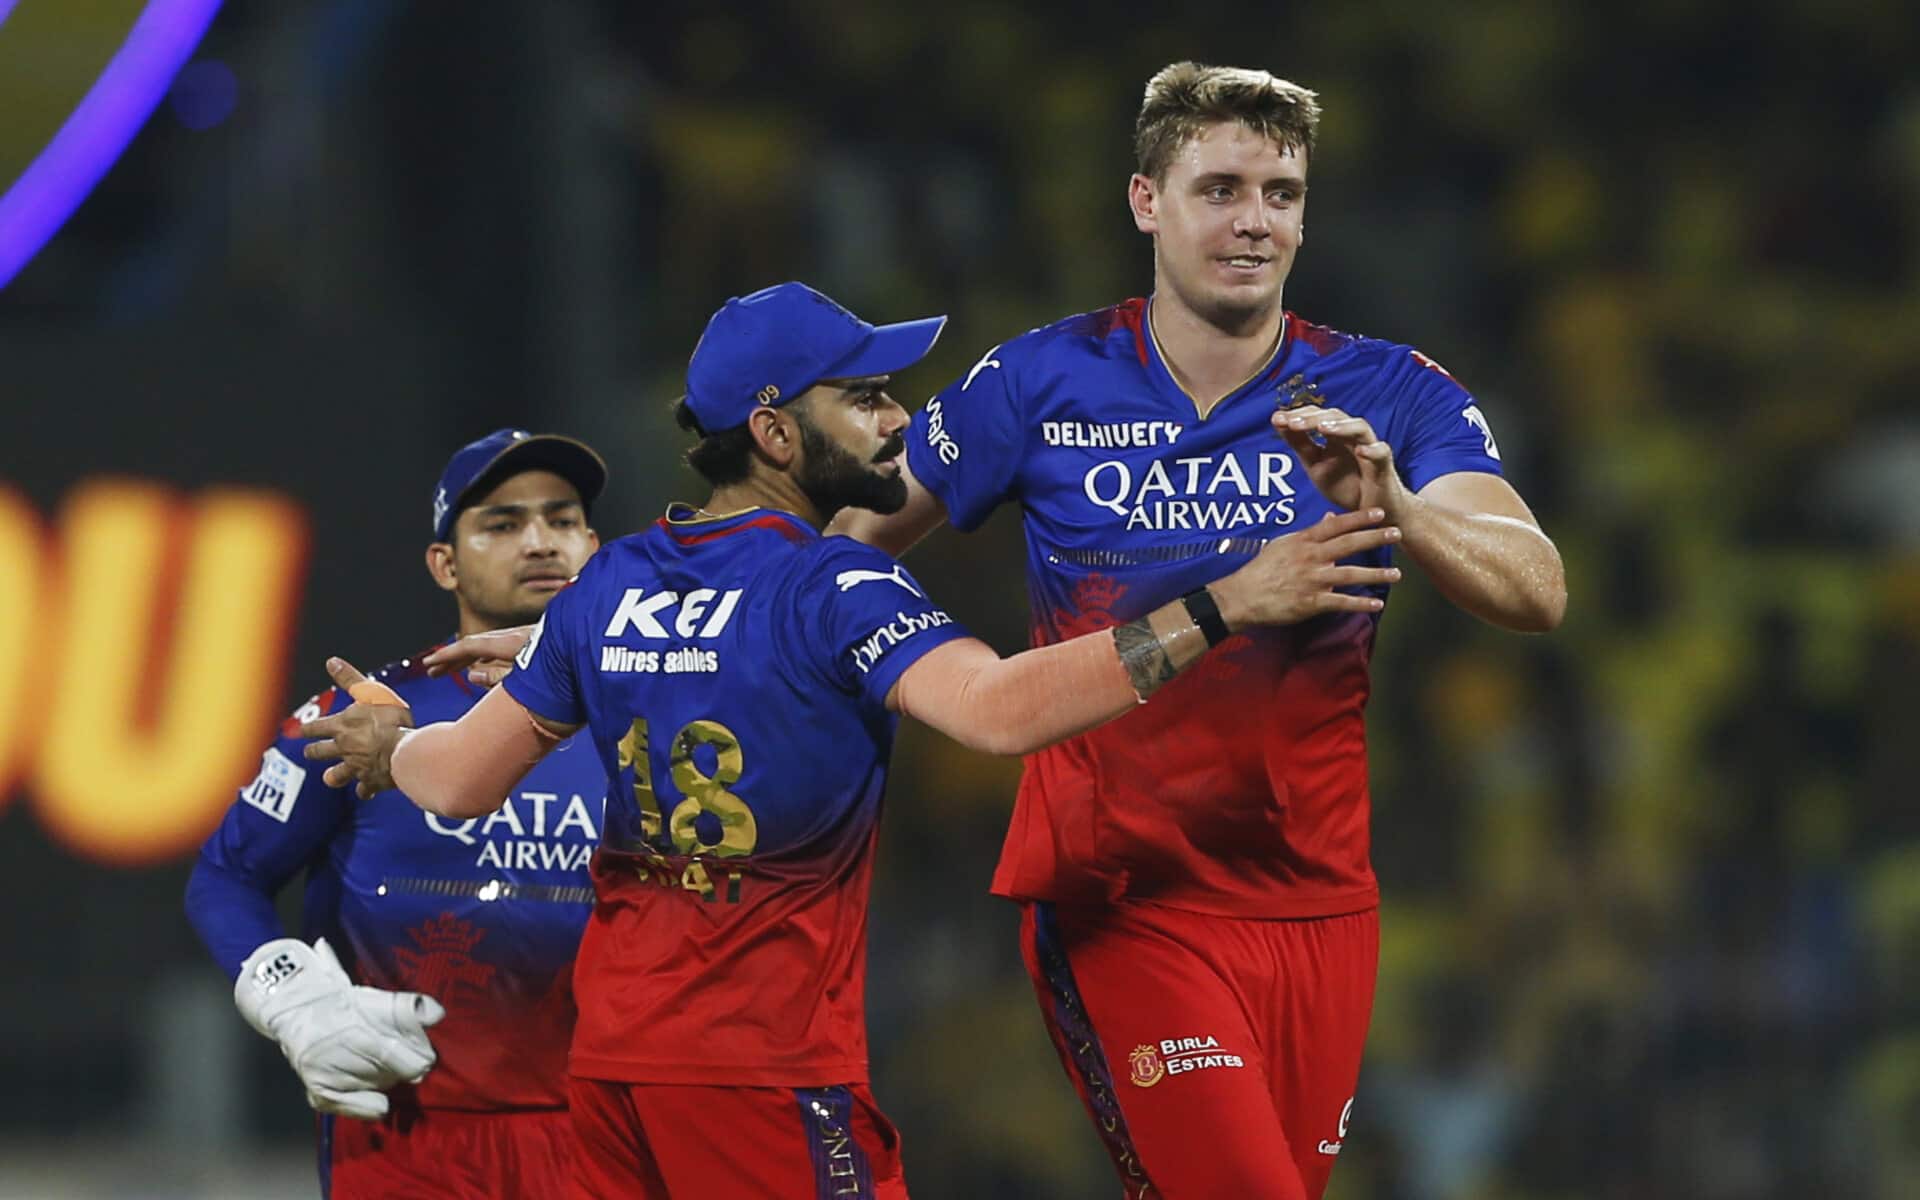 Cameron Green bagged two CSK wickets (Source: IPL)